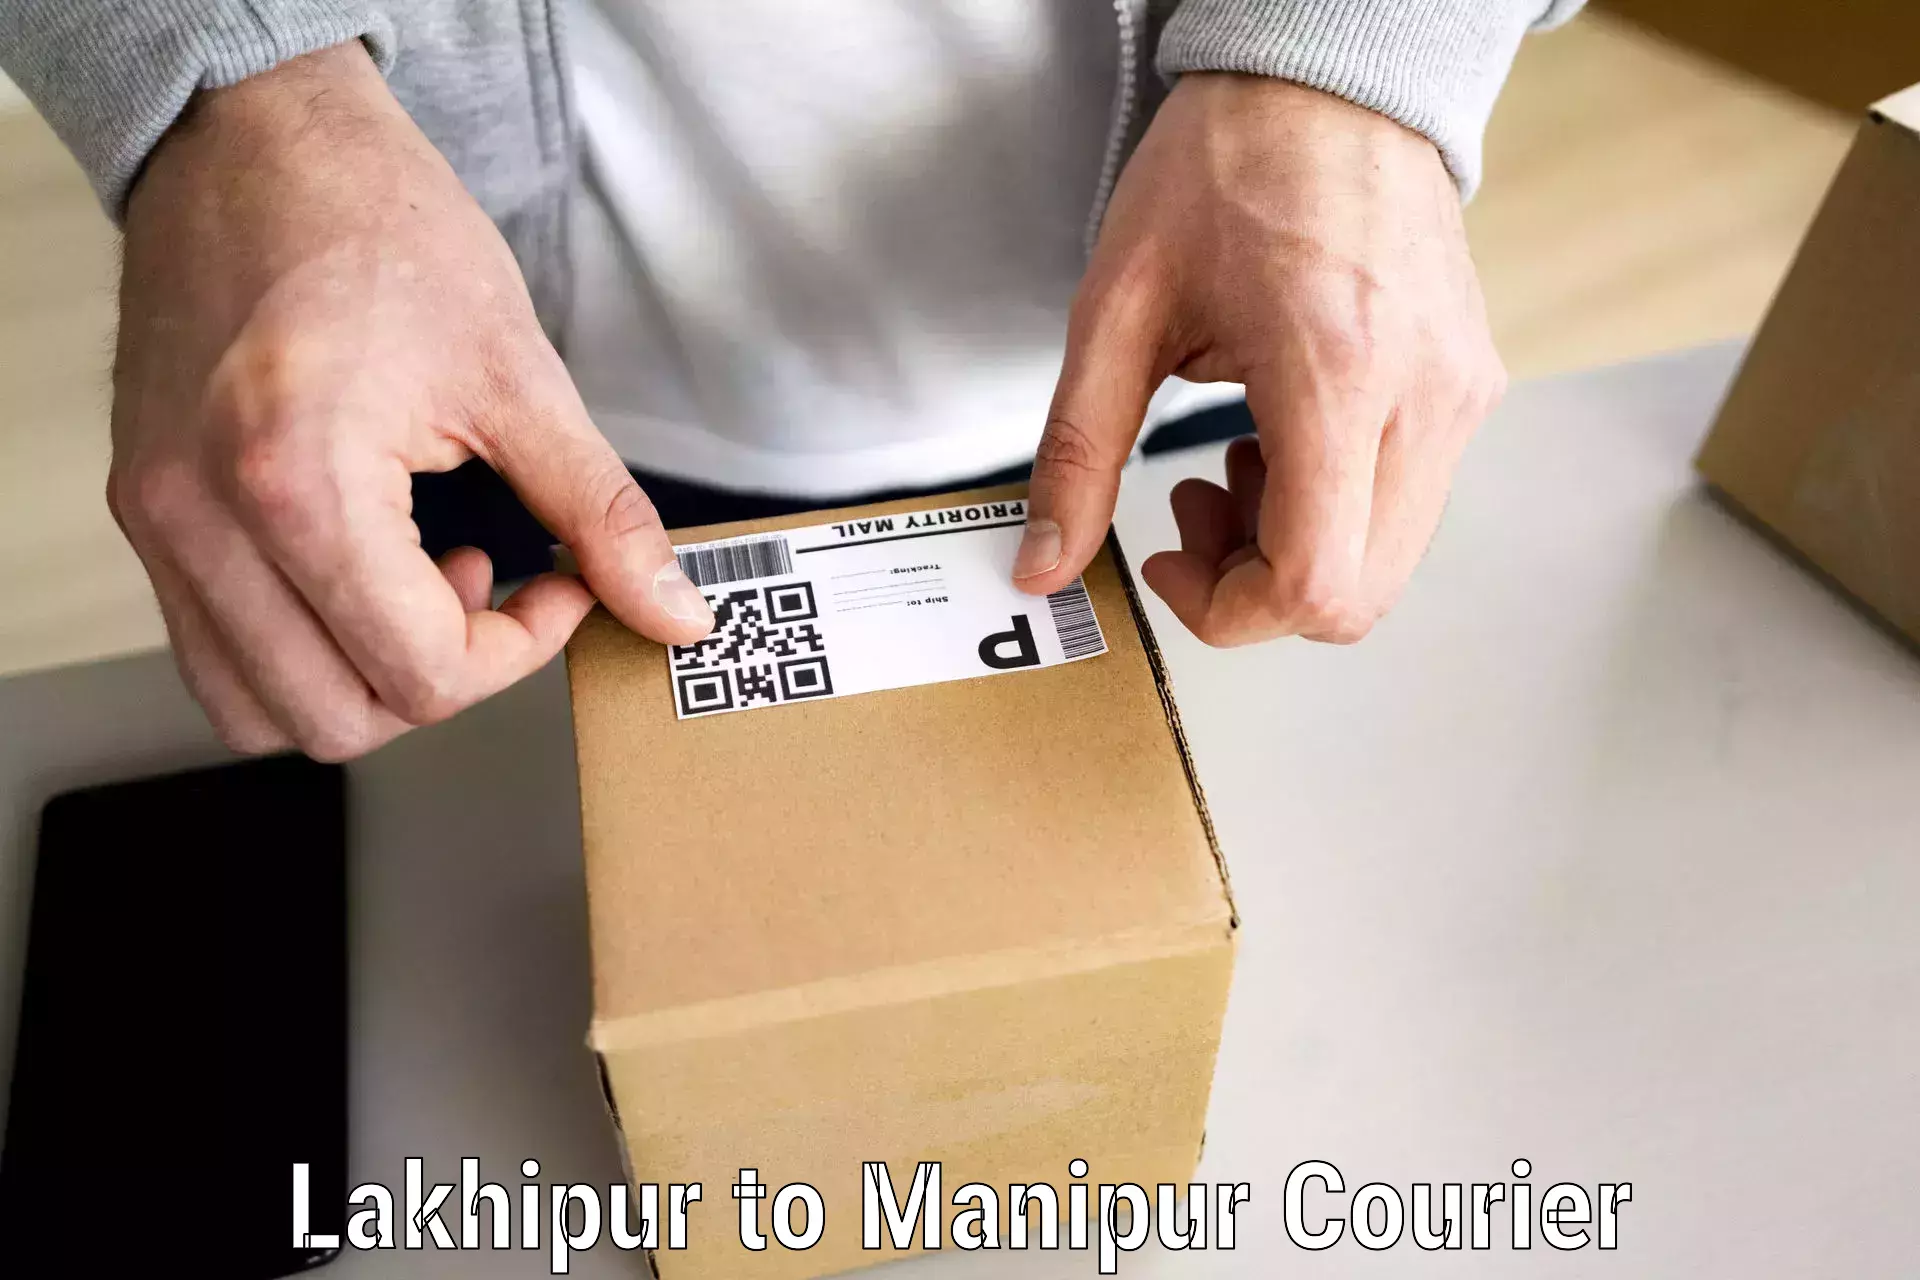 Furniture relocation experts Lakhipur to Imphal